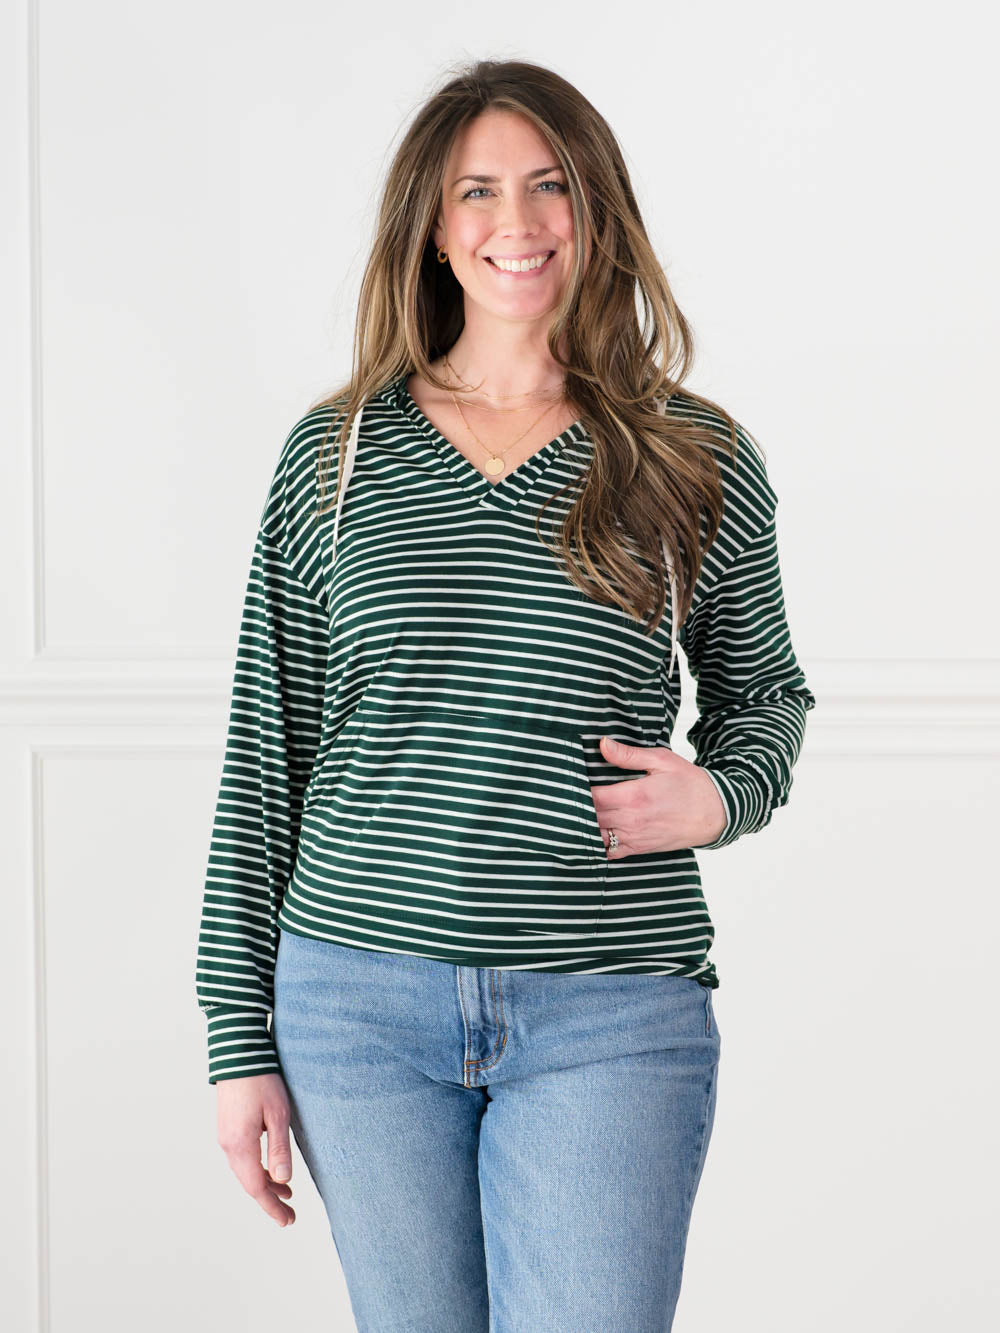 Kelly Green Ribbed Long Sleeve Top for Tall Women - Amalli Talli